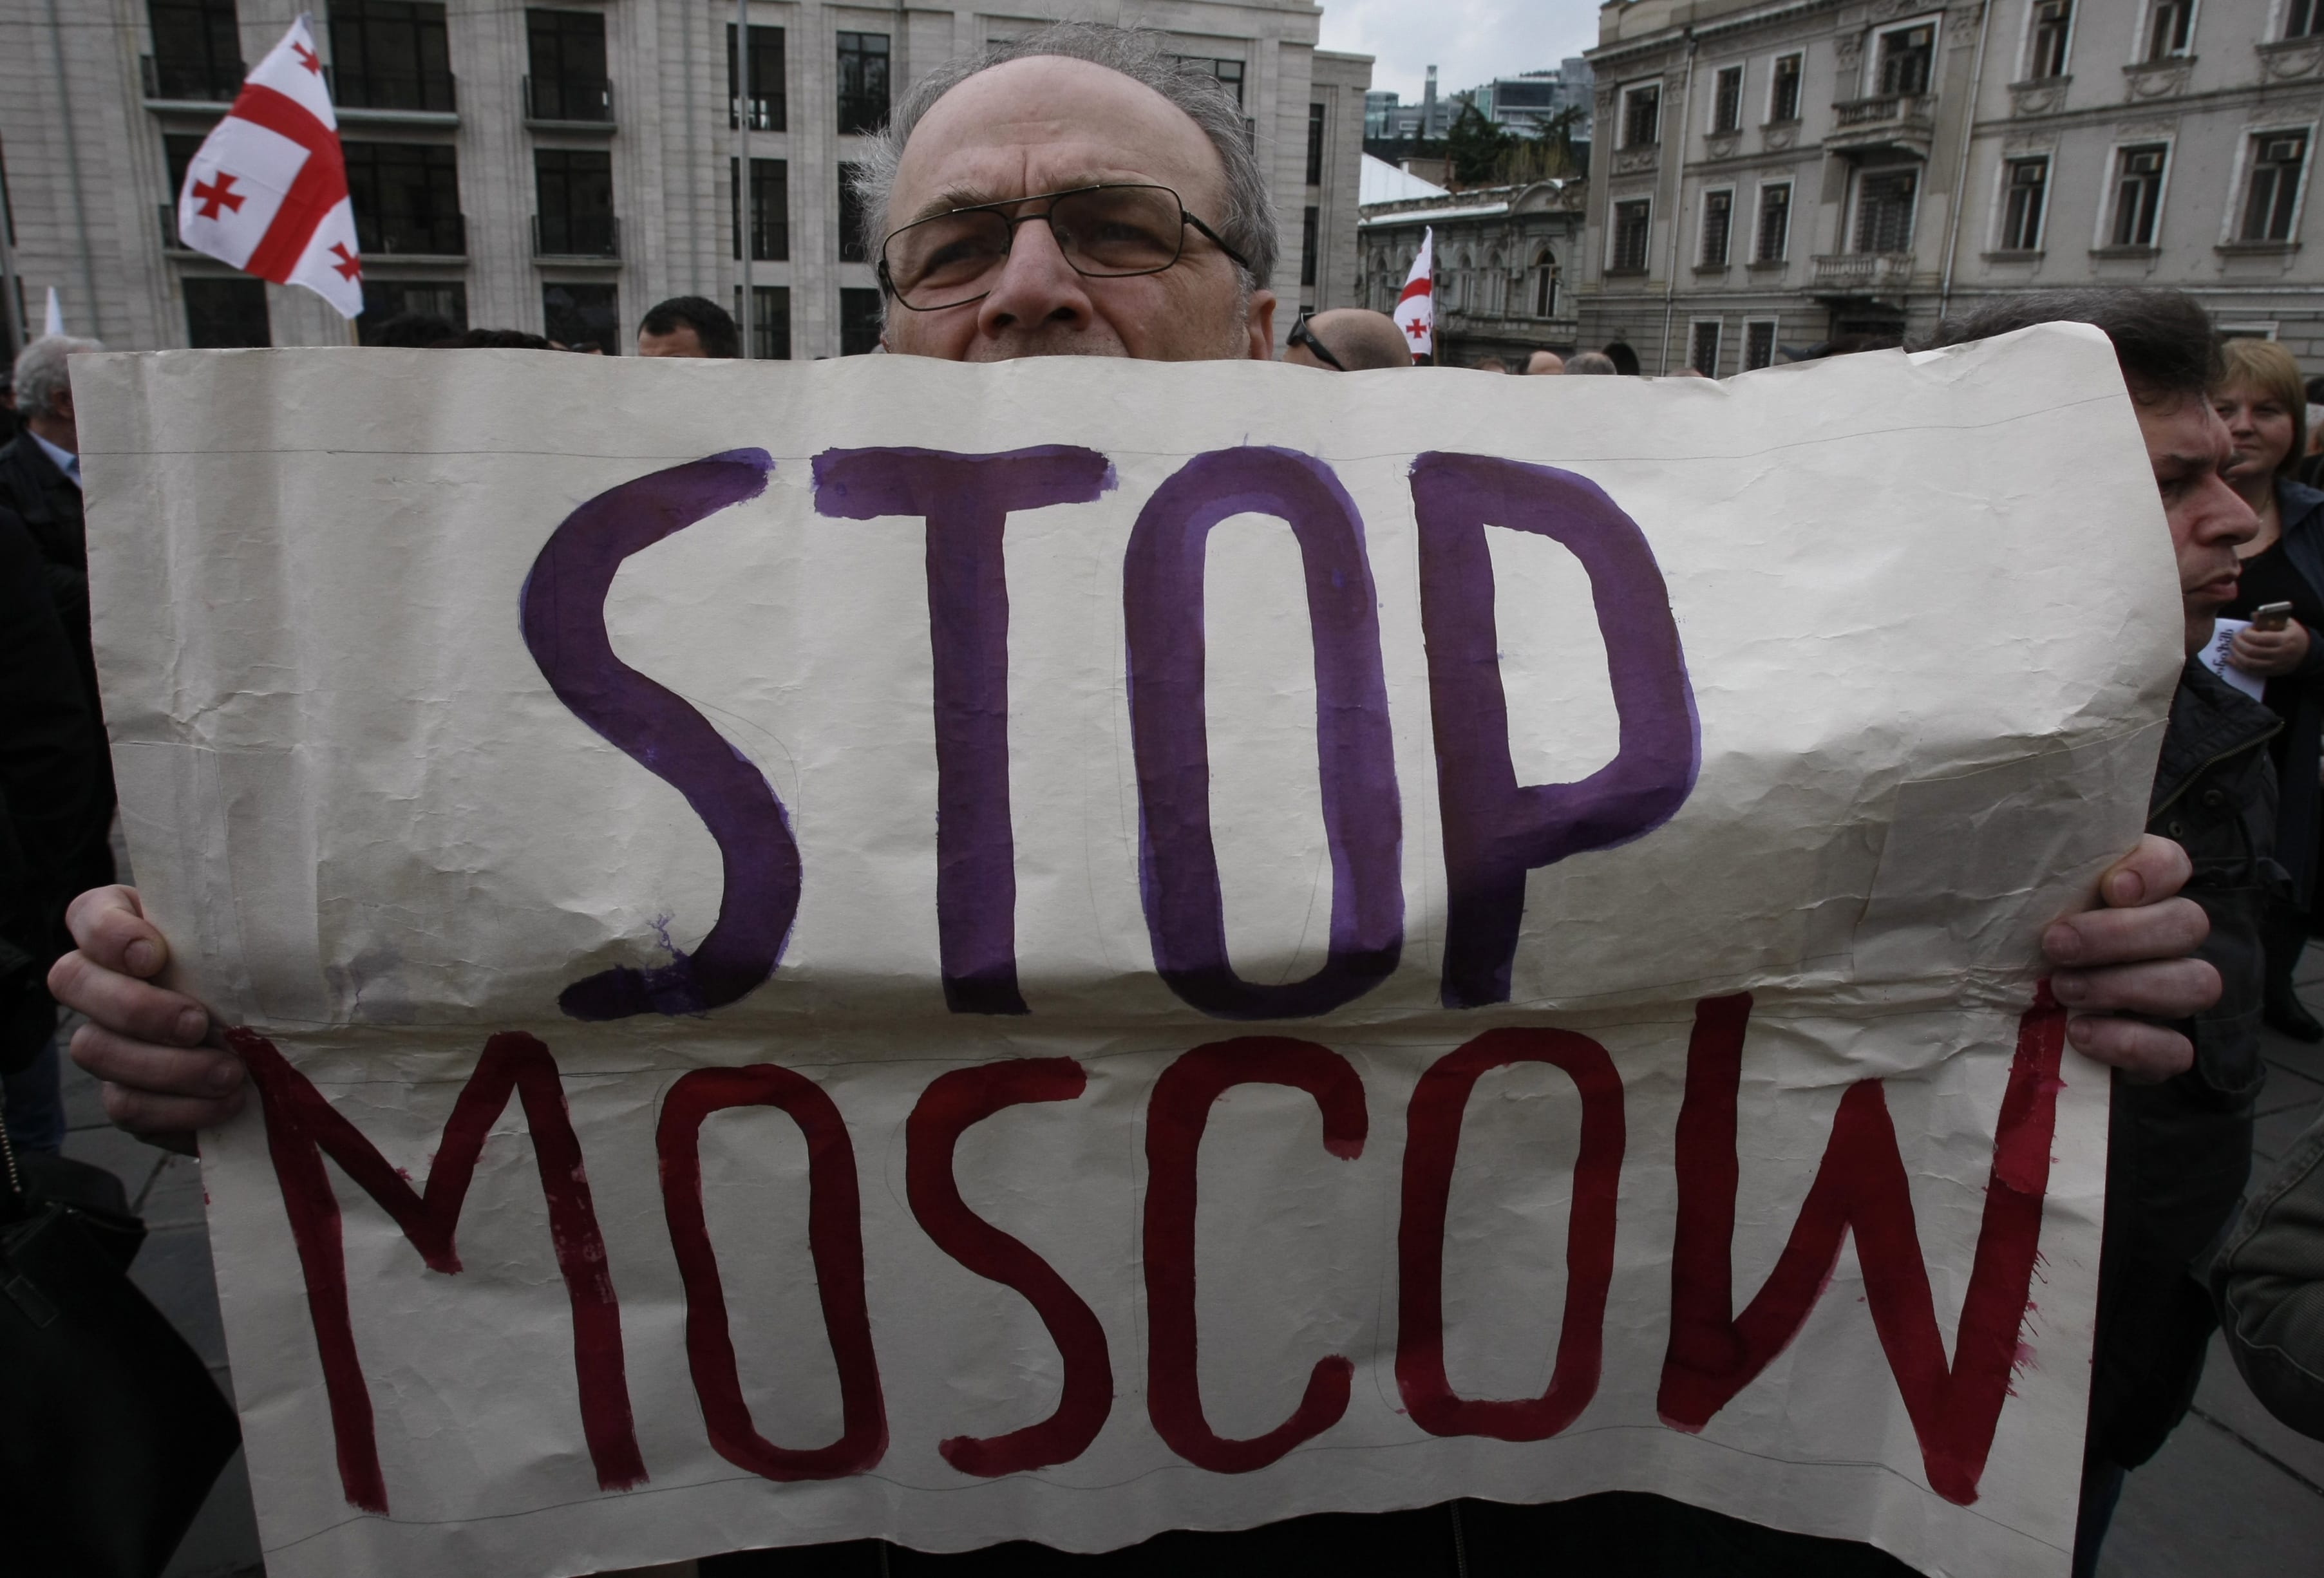 A man holds a poster reading &quot;Stop Moscow&quot; during a rally in support of United Ukraine in Tbilisi, Georgia, on Sunday.  The U.S. Ambassador to the United Nations, Samantha Power, told ABC's &quot;This Week&quot; program on Sunday that recent violence in Ukraine &quot;bears the tell-tale signs of Moscow's involvement&quot; and went on to say. &quot;It's professional, it's coordinated.